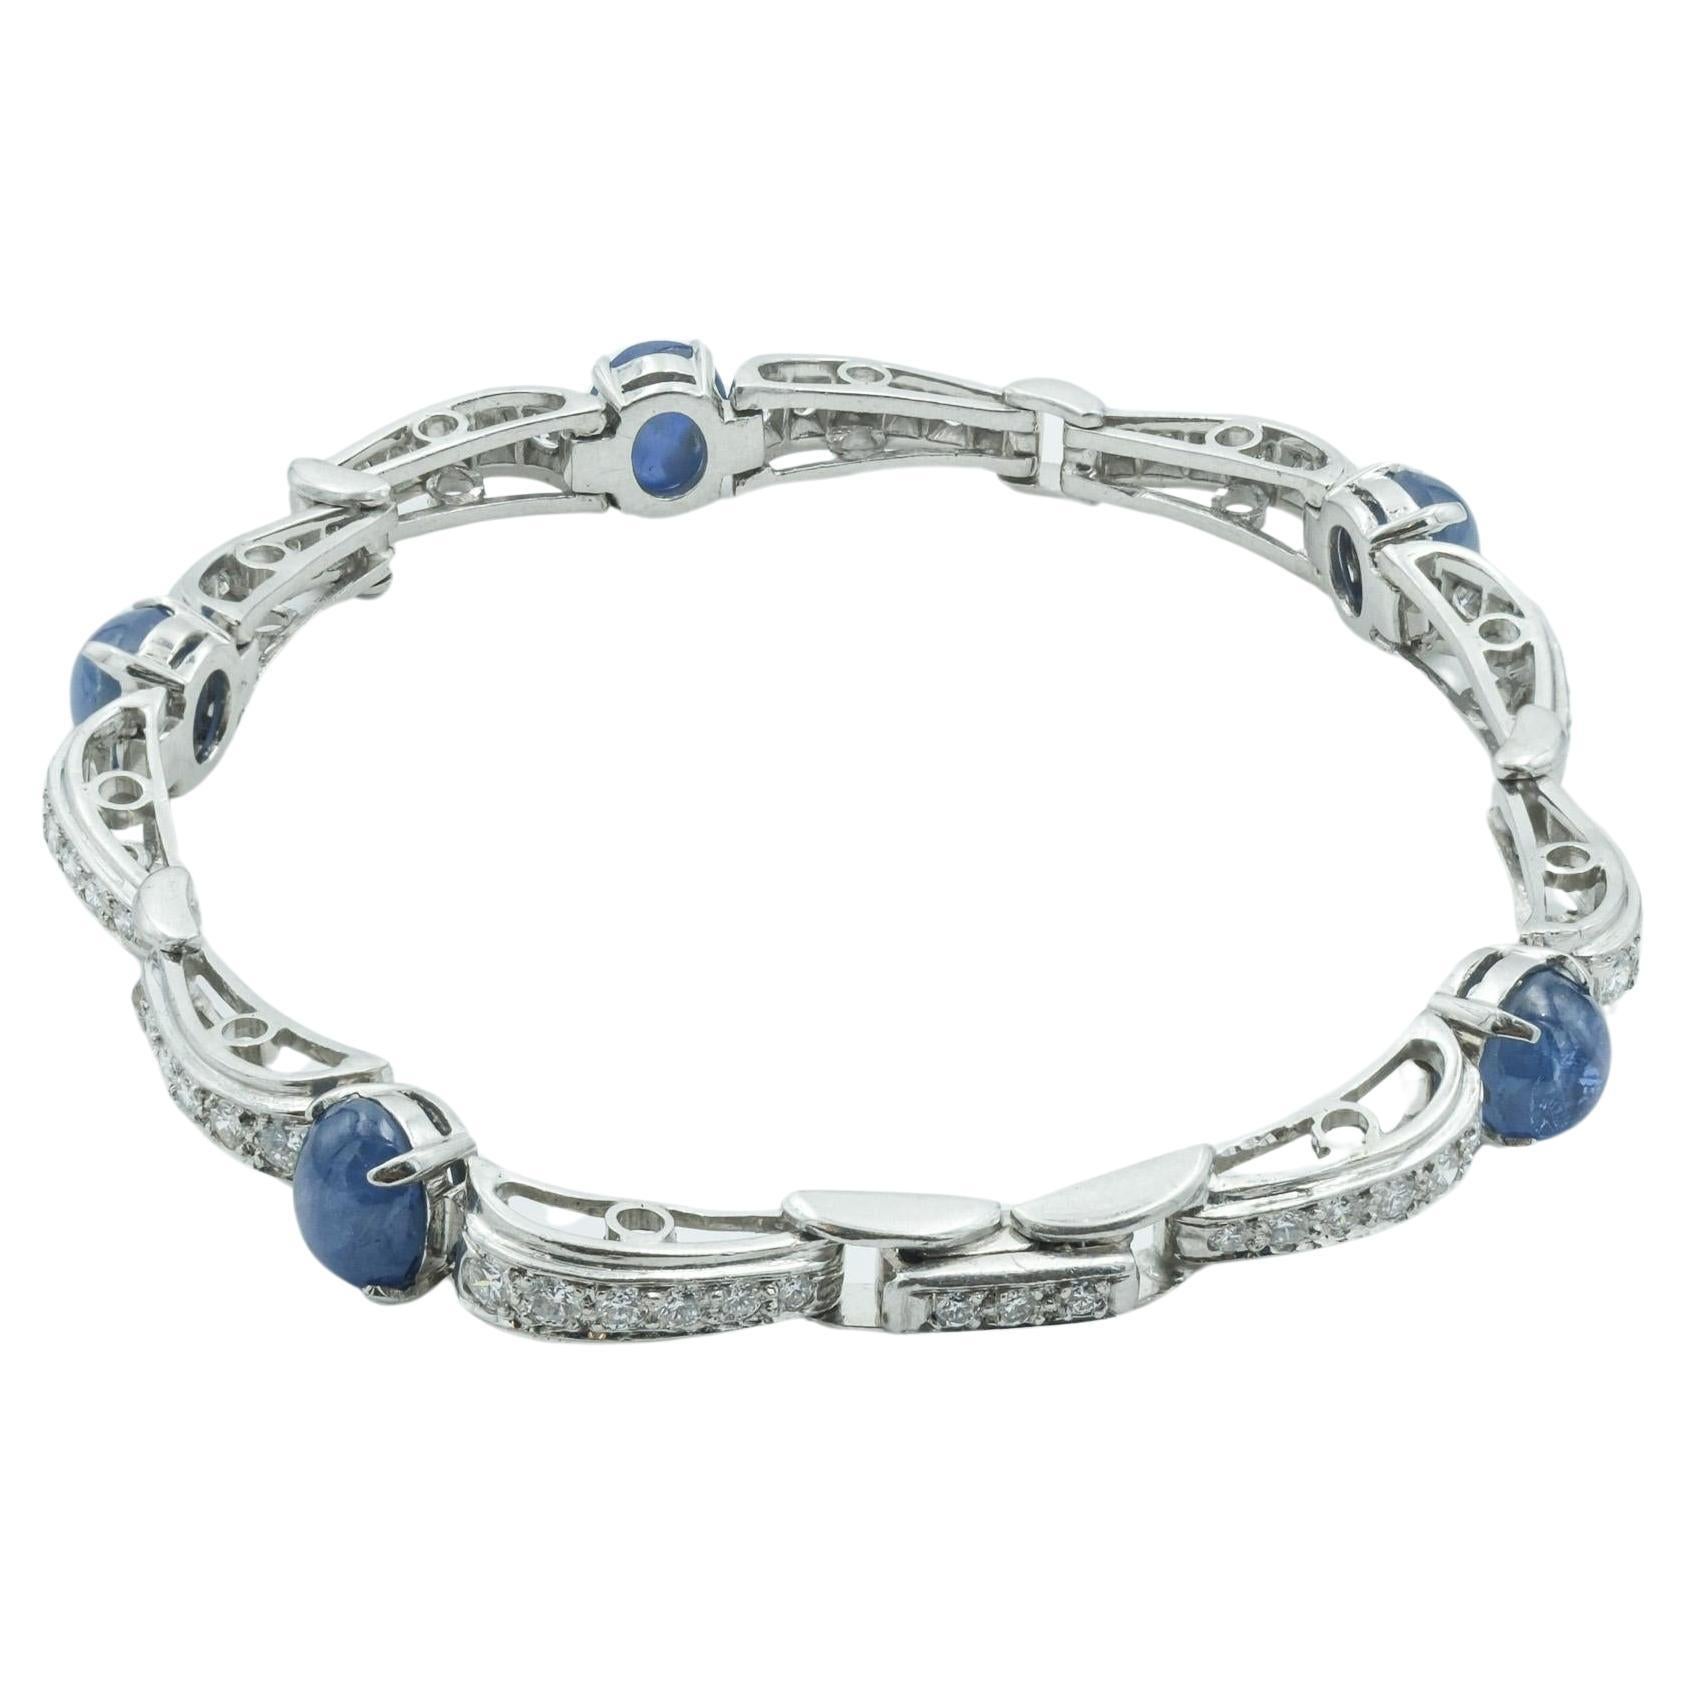 This bracelet is a splendid example of Platinum Art Deco jewelry, embodying the sophistication and elegance of the era. It features a series of captivating star sapphires, totaling approximately 3.95 carats, each exhibiting the unique asterism or